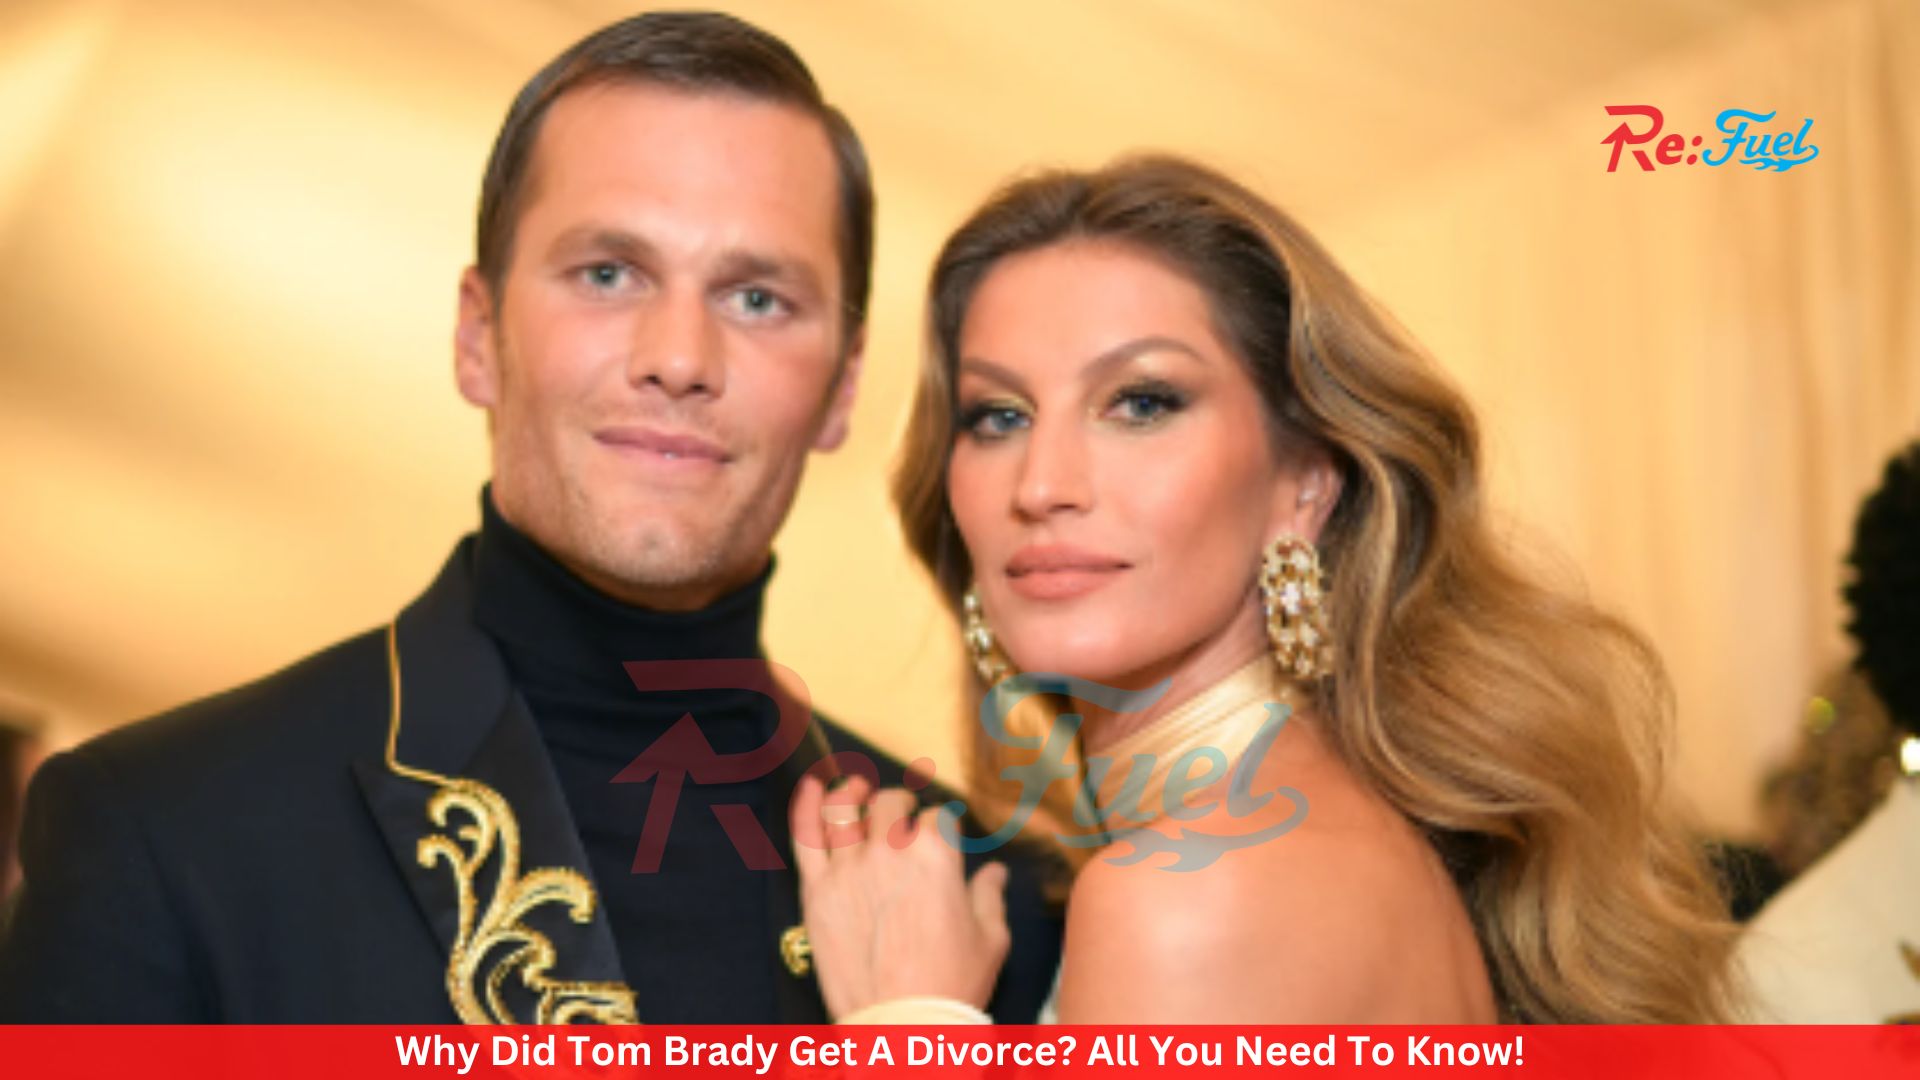 Why Did Tom Brady Get A Divorce? All You Need To Know!